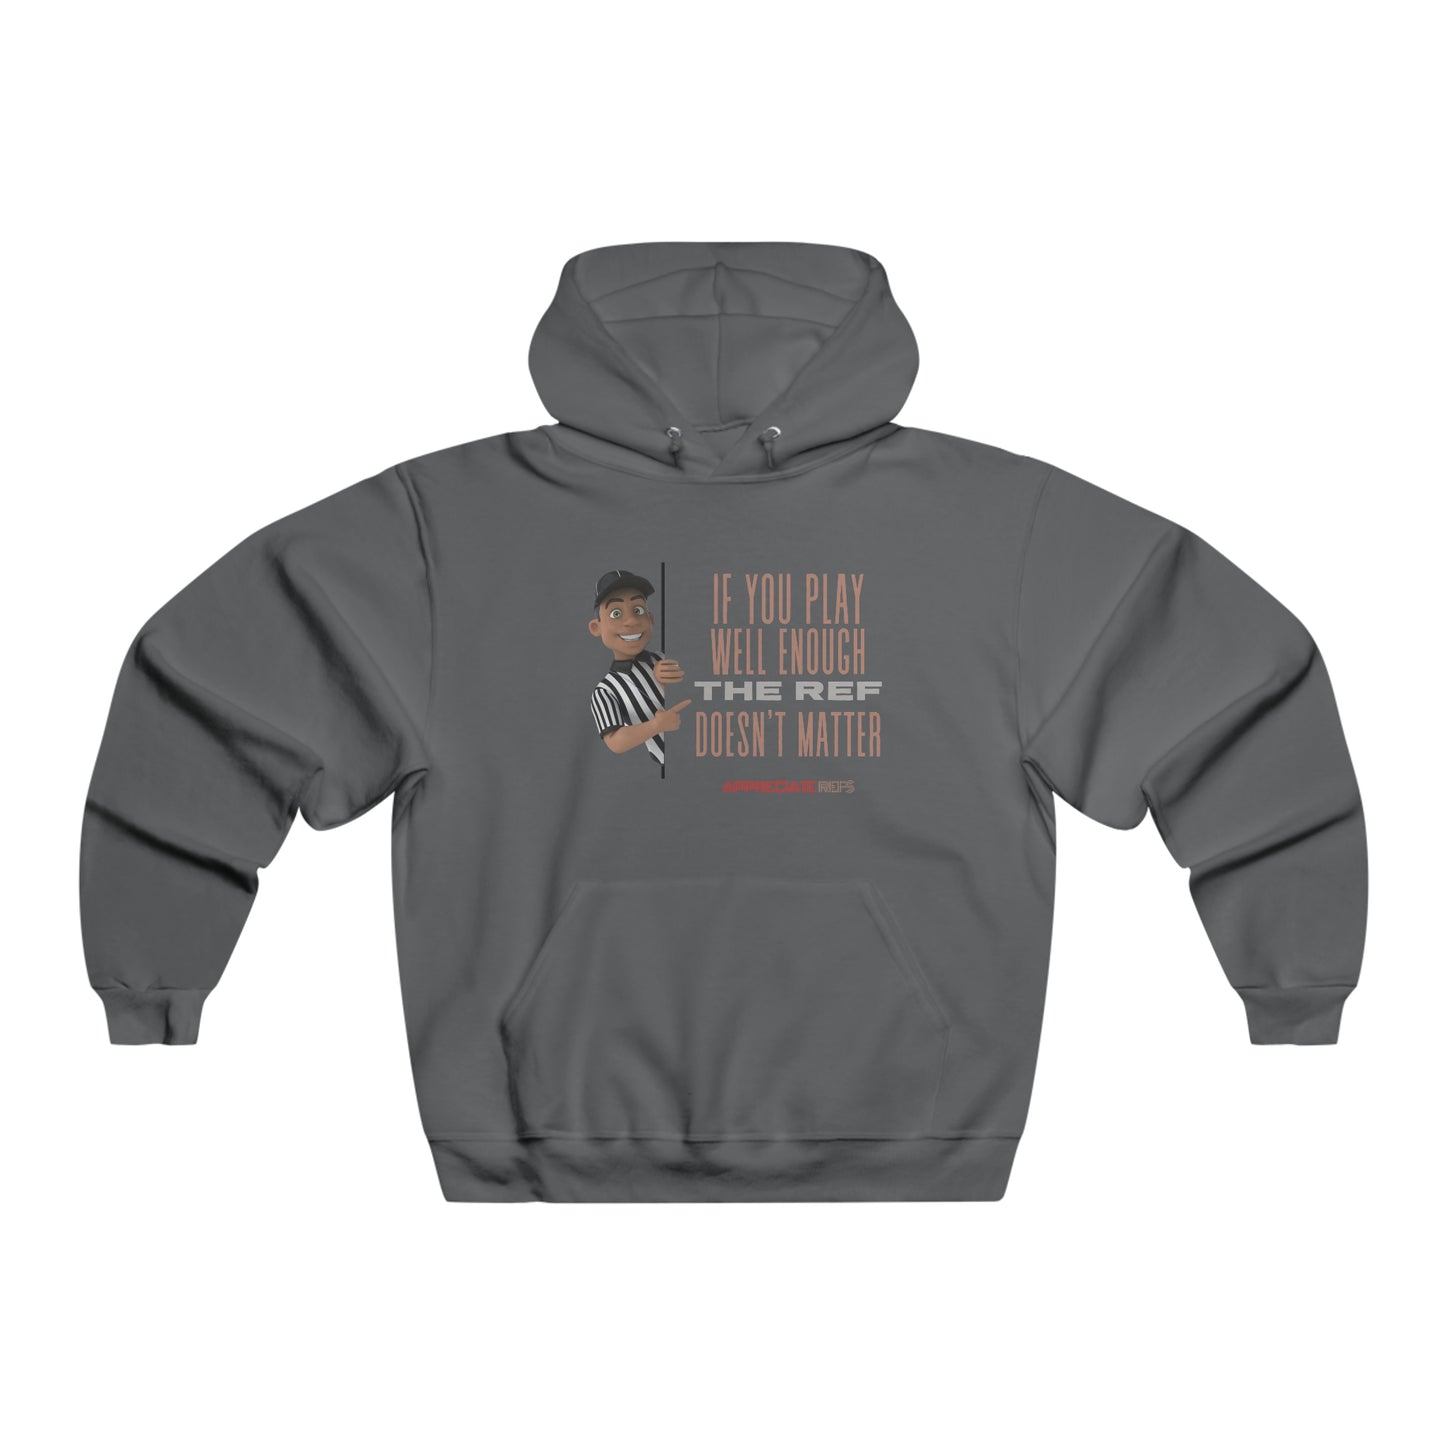 If You Play Well Enough Men's NUBLEND® Hooded Sweatshirt | Gifts for Referees | For Sports Officials